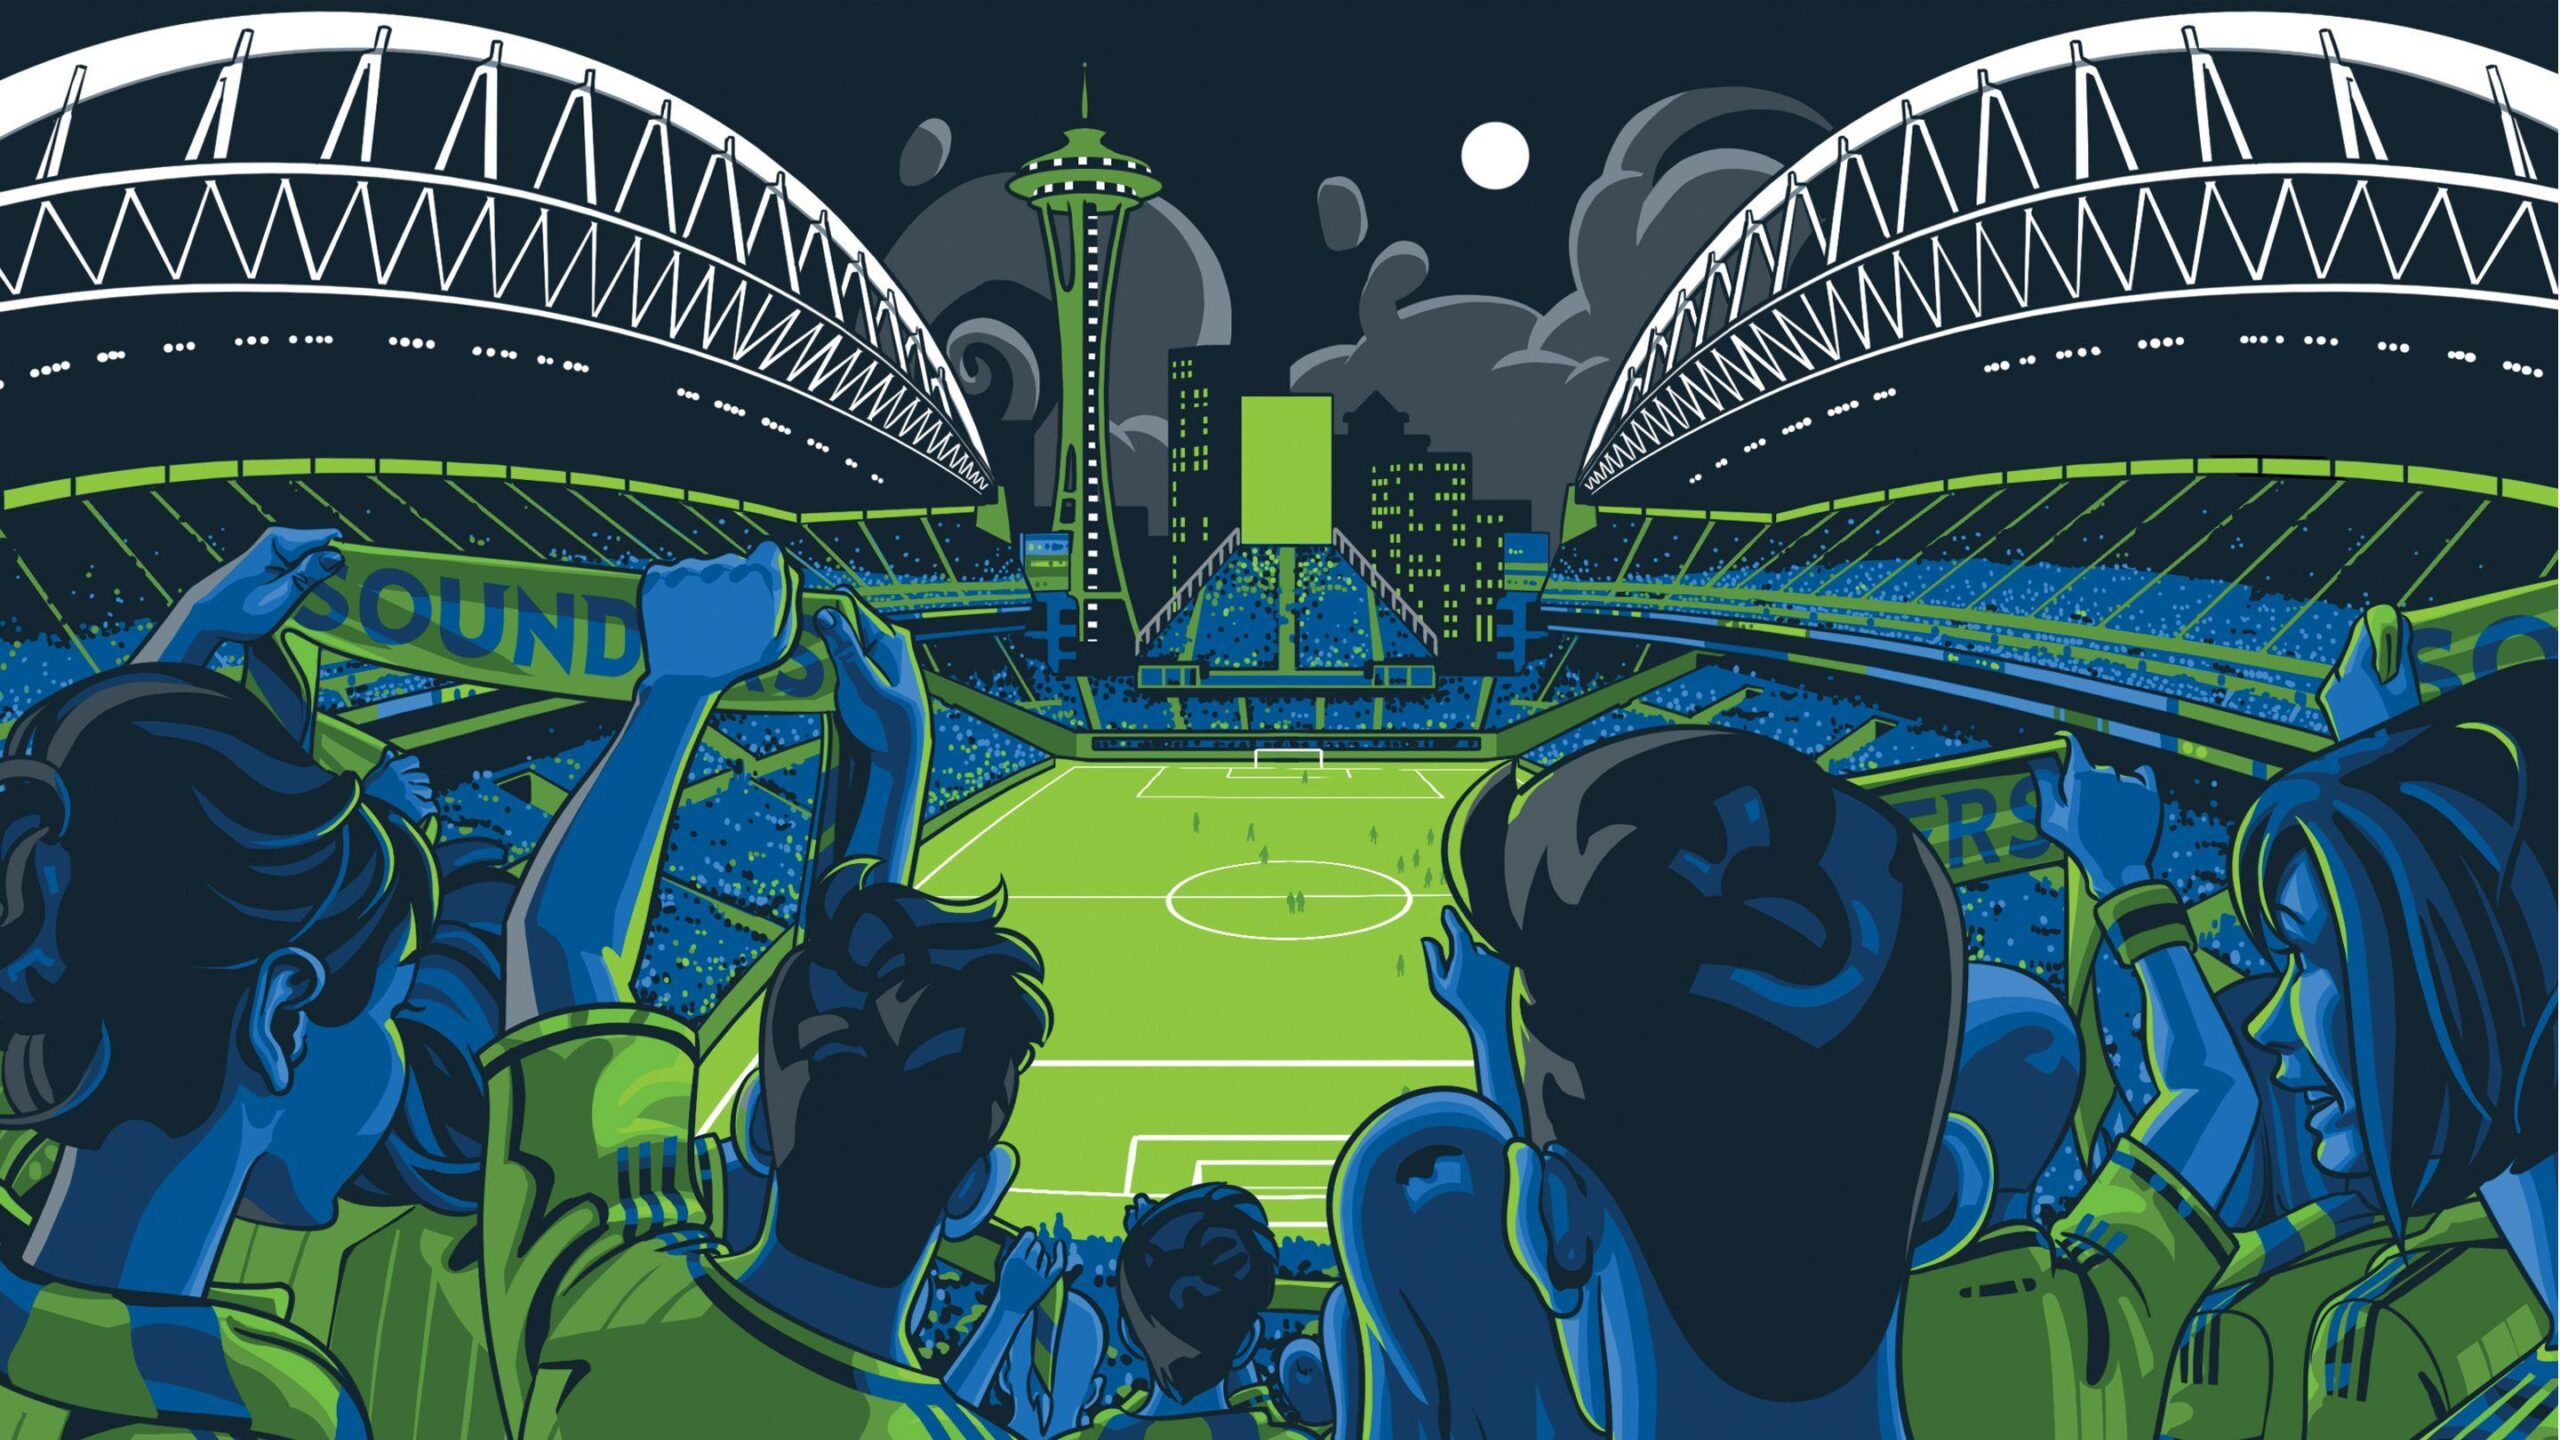 CenturyLink Field comes alive on custom Xbox One console